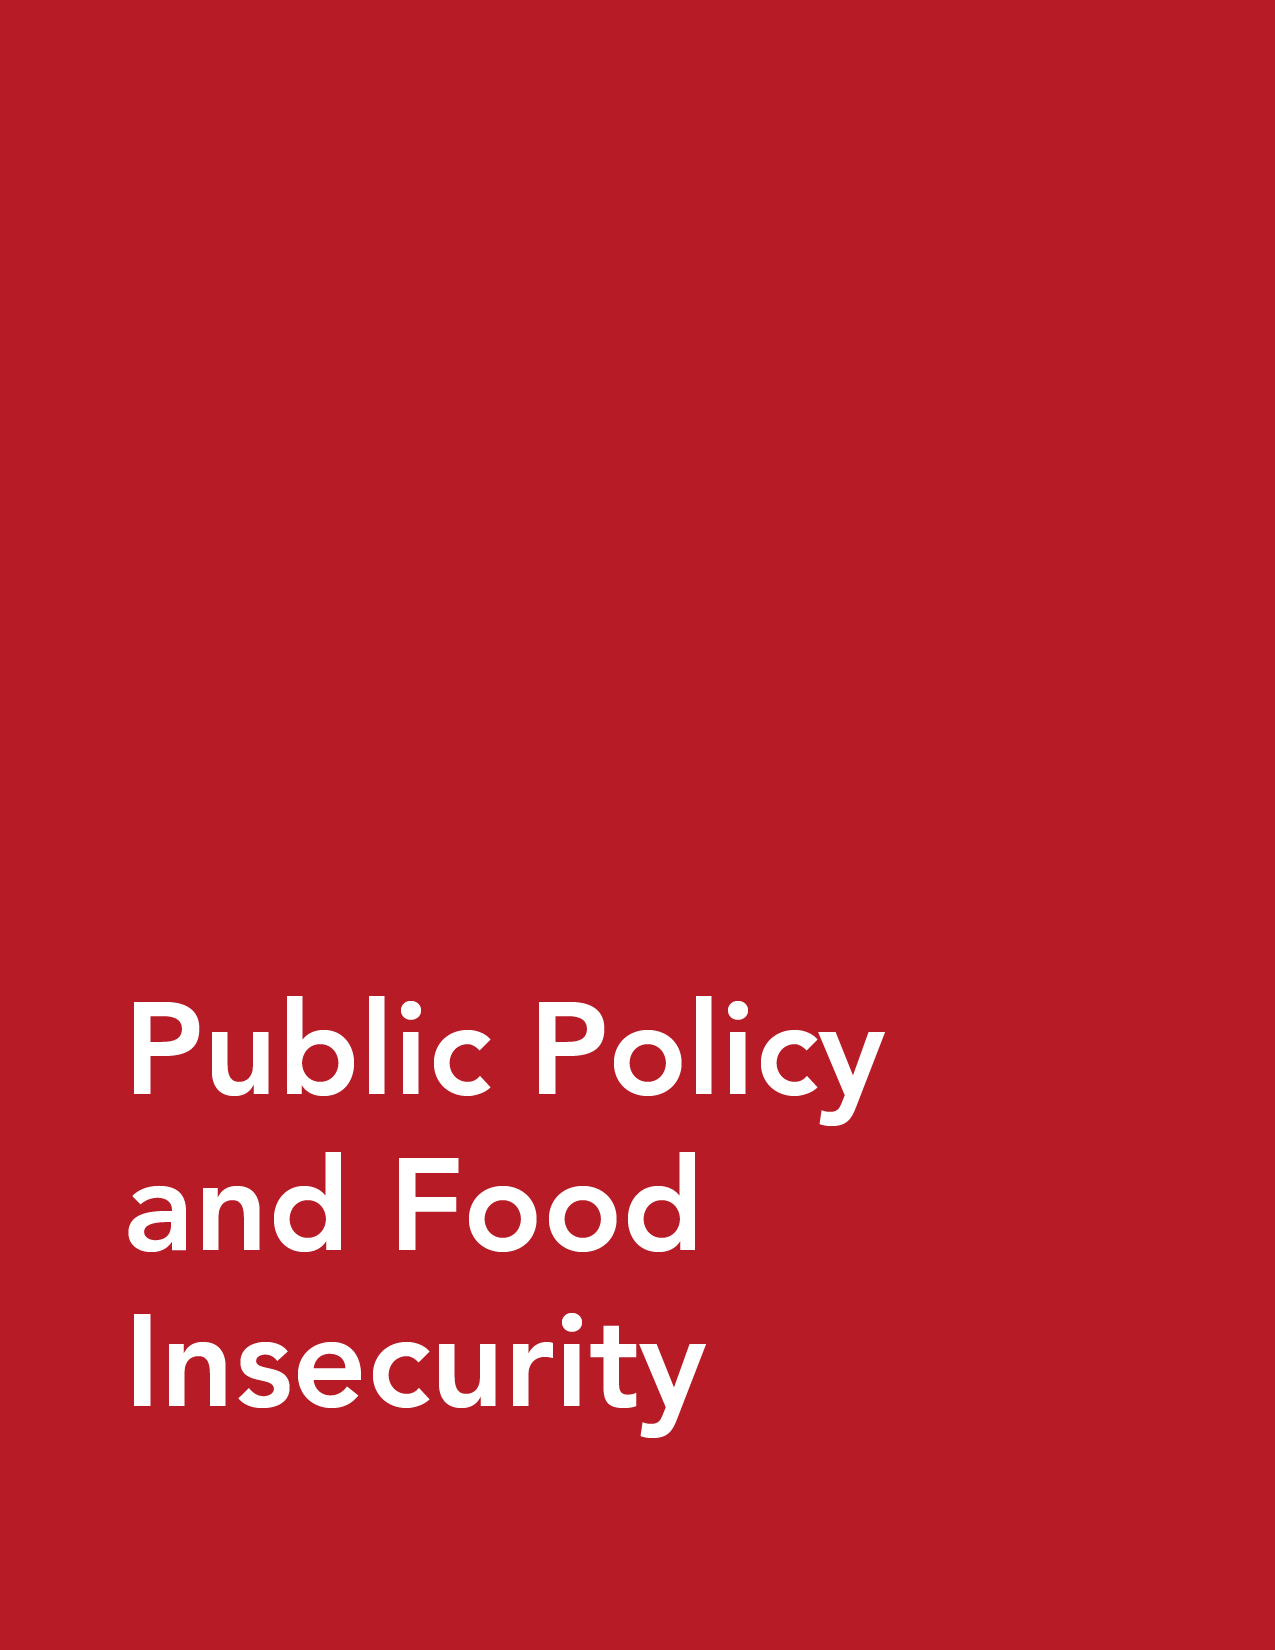 Public Policy and Food Insecurity